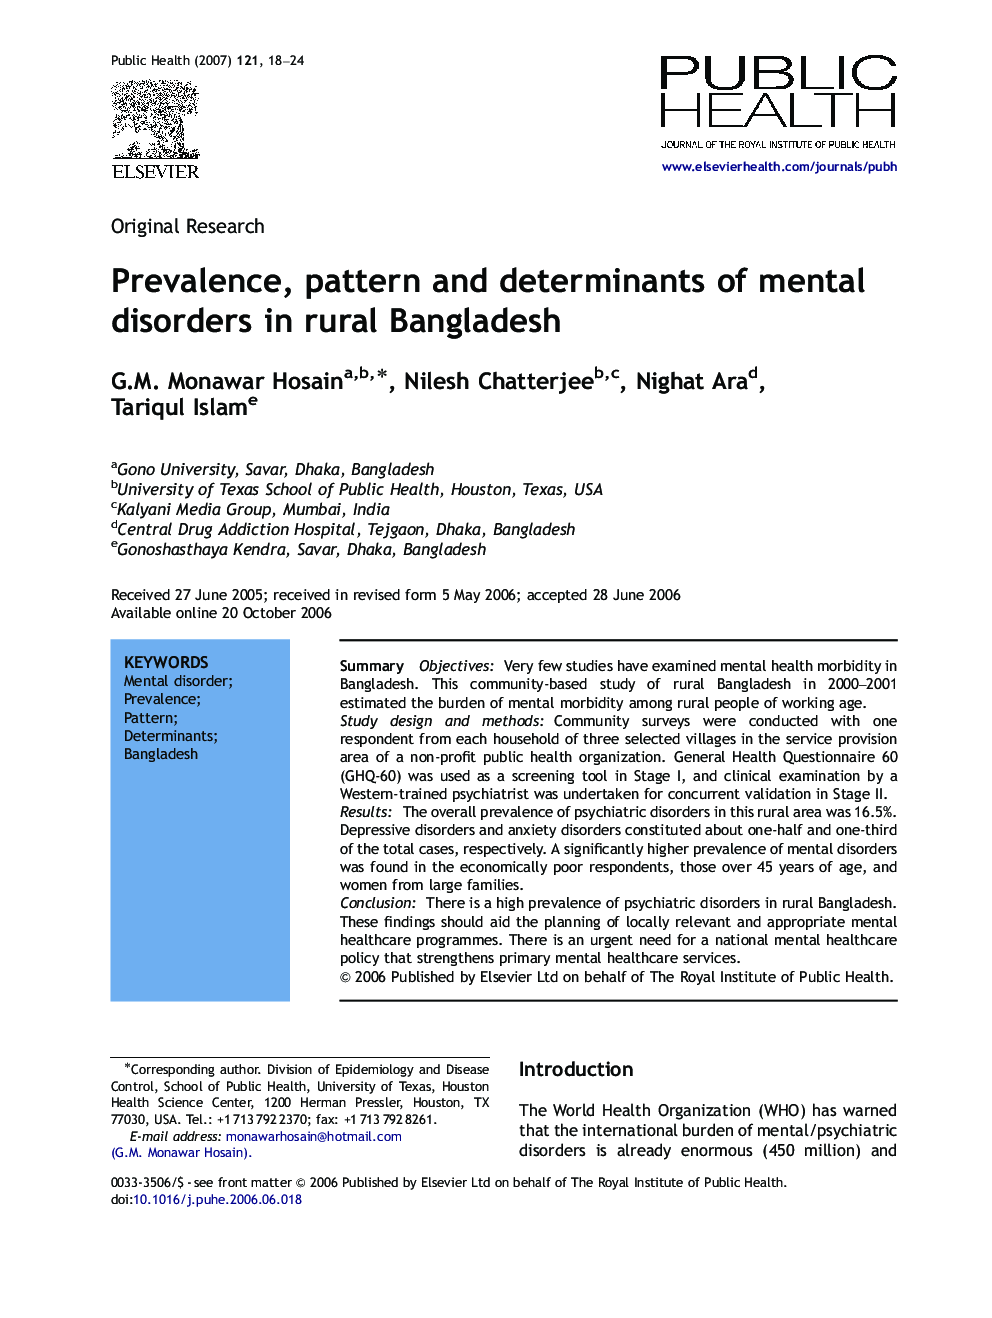 Prevalence, pattern and determinants of mental disorders in rural Bangladesh